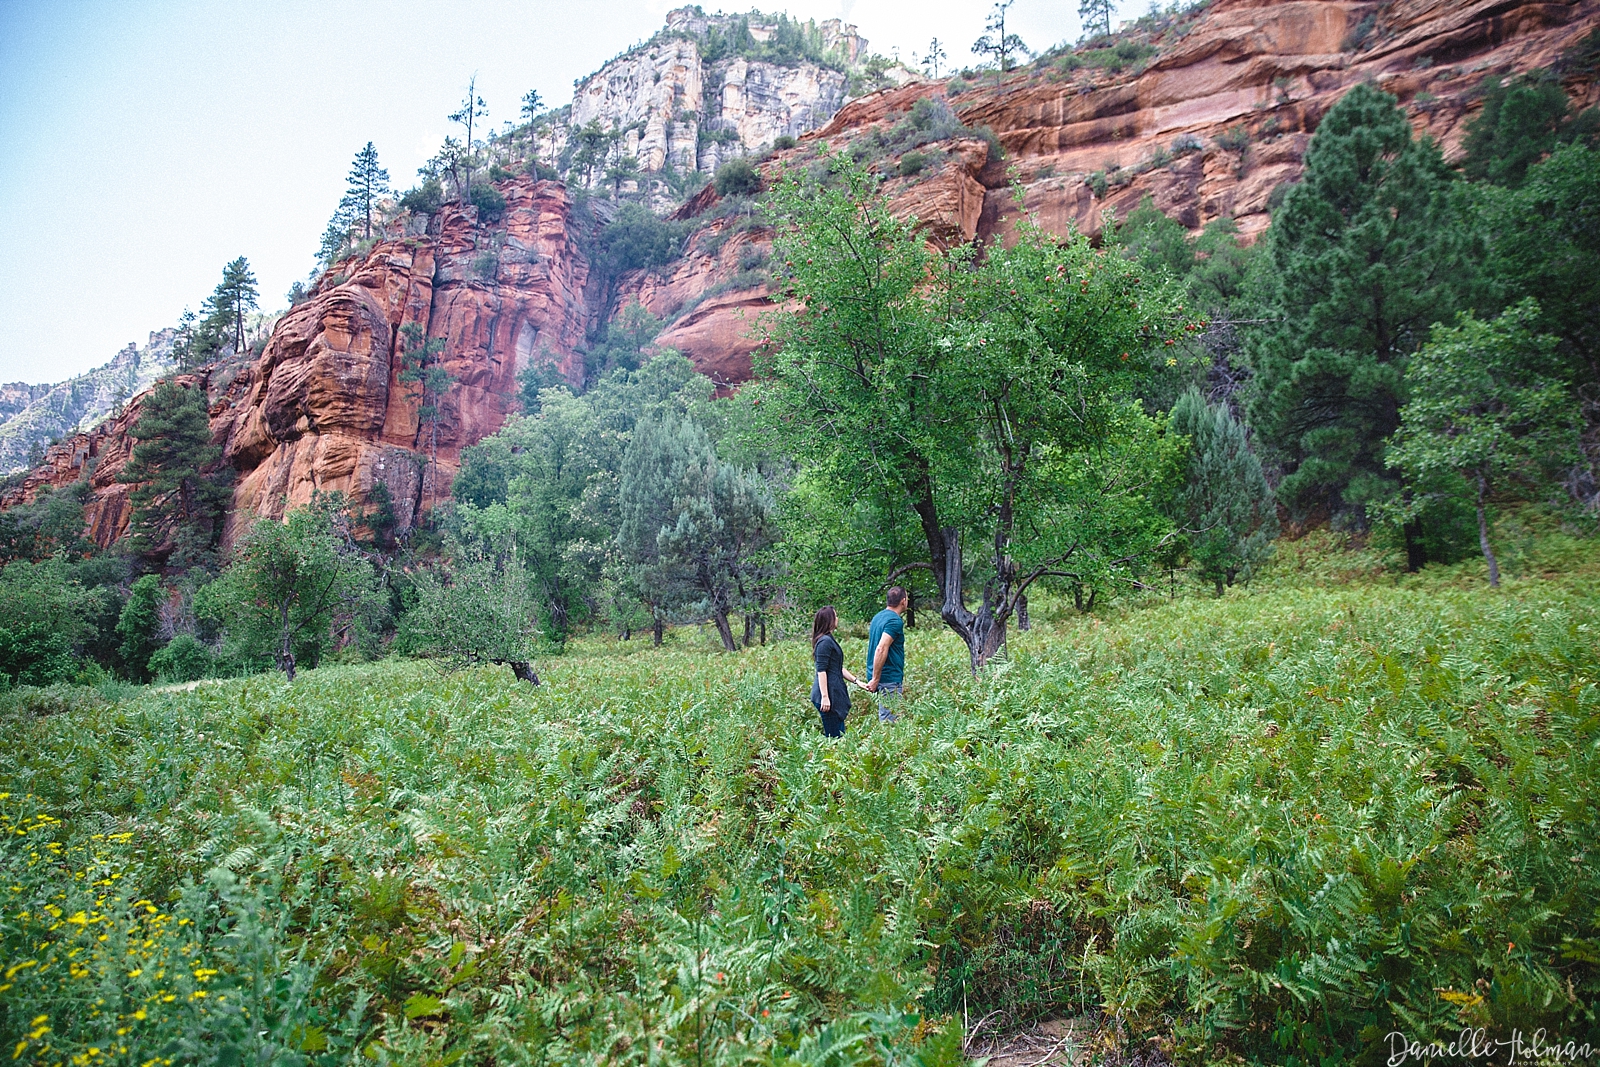 Engaged couple sitting in a field of ferns in an apple orchard with Sedona red rocks in the background